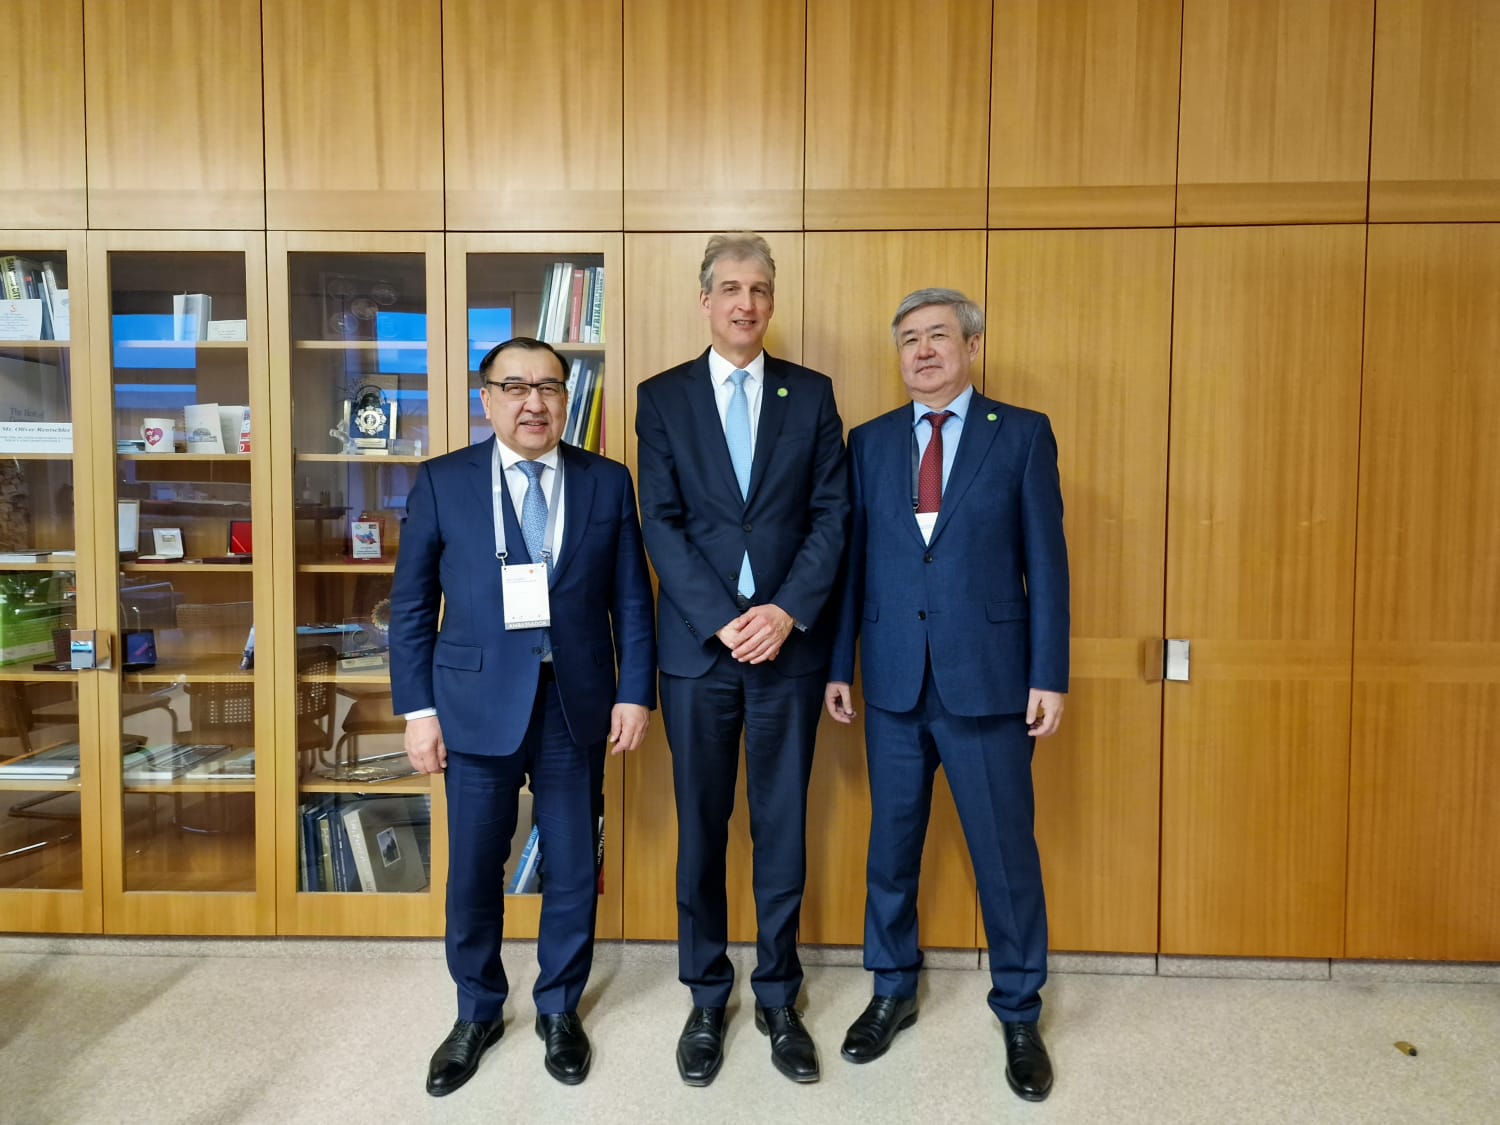 Kazakhstan's ambitions for a "green" energy transformation was discussed at the Berlin Dialogue on Energy Transition (BETD)